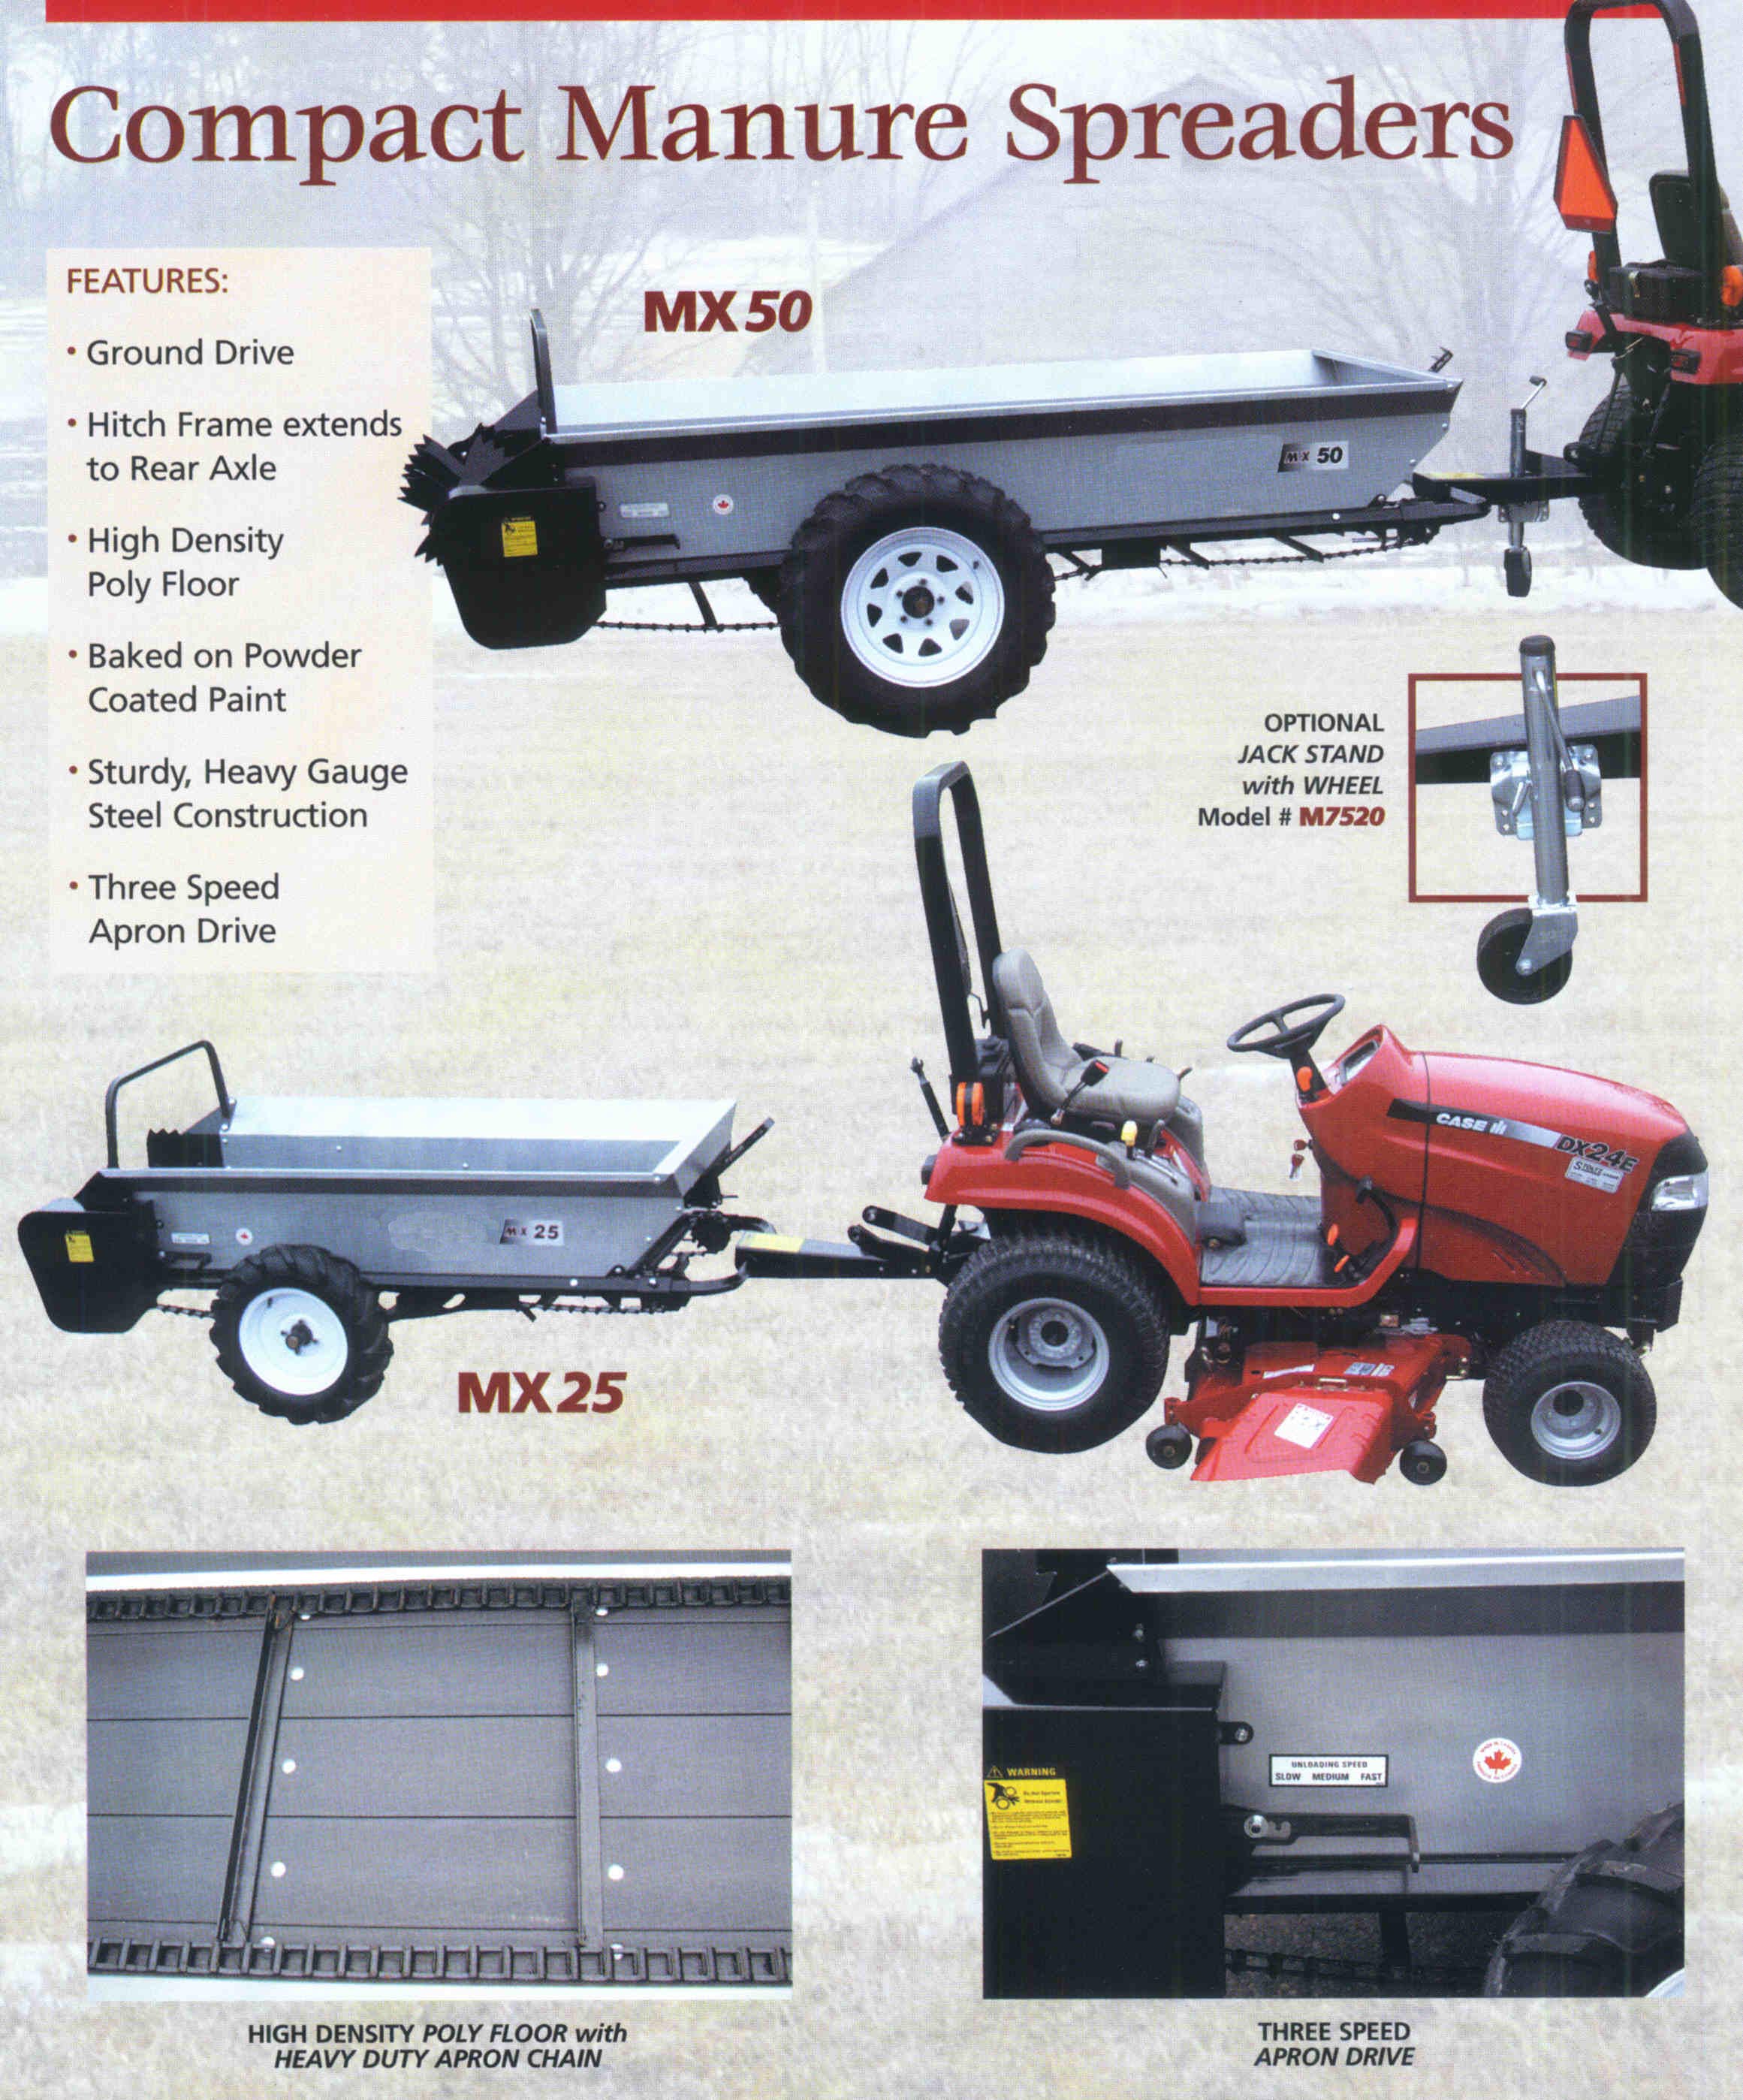 MX Series Compact Manure Spreaders